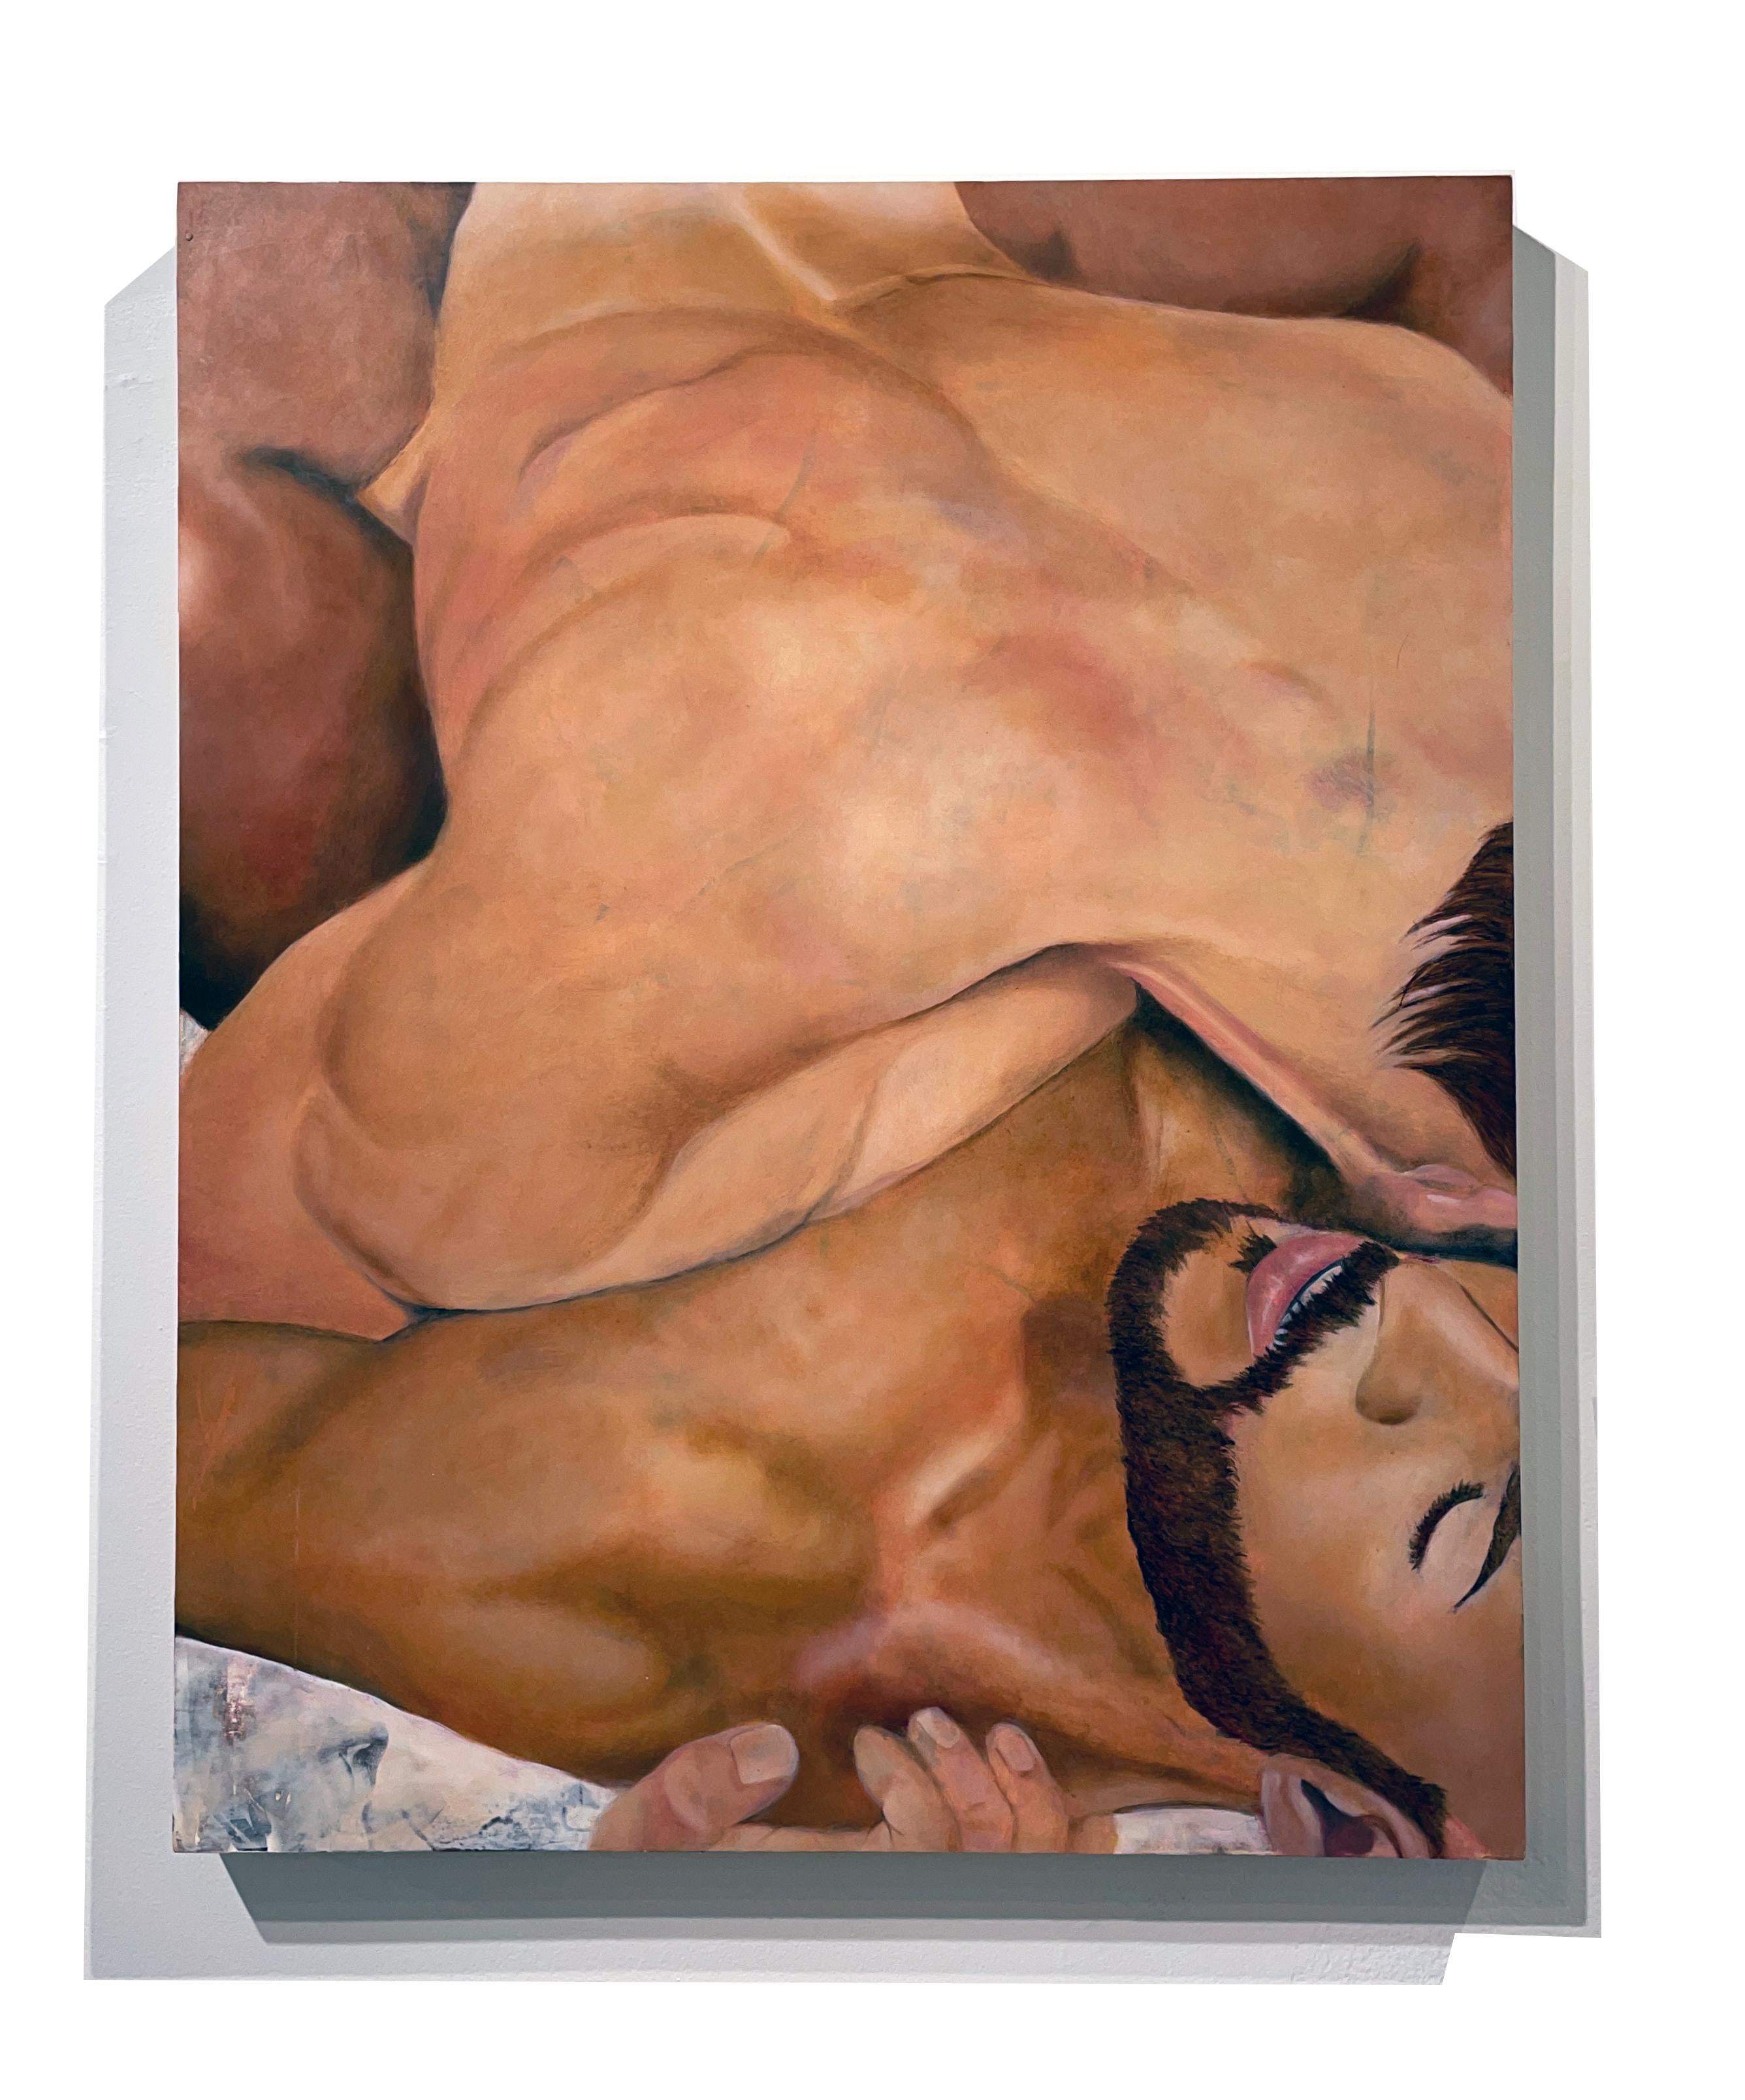 Their Whole Private Selves - Two Nude Bodies Entwined, Original Oil on Panel - Painting by Rick Sindt